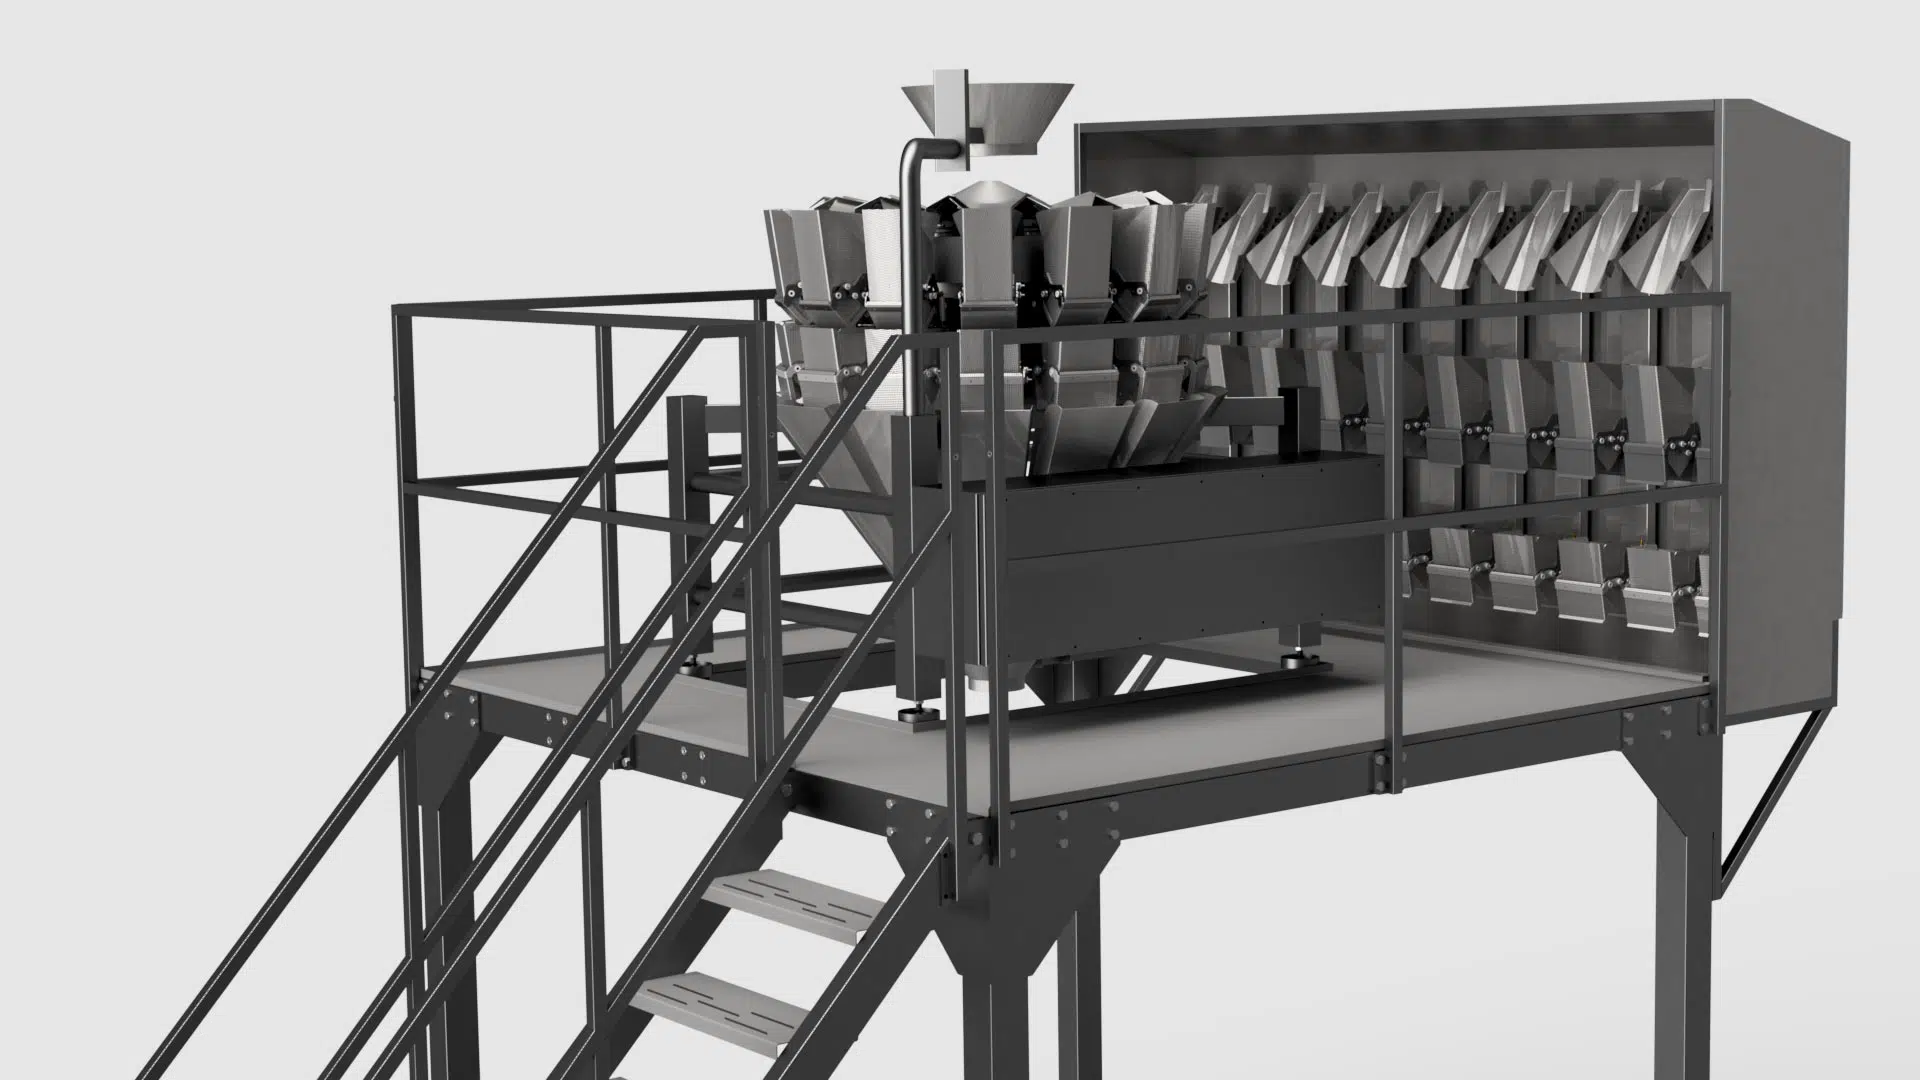 Image of Bessen's industrial working platform, designed for safe and efficient access to machinery and equipment